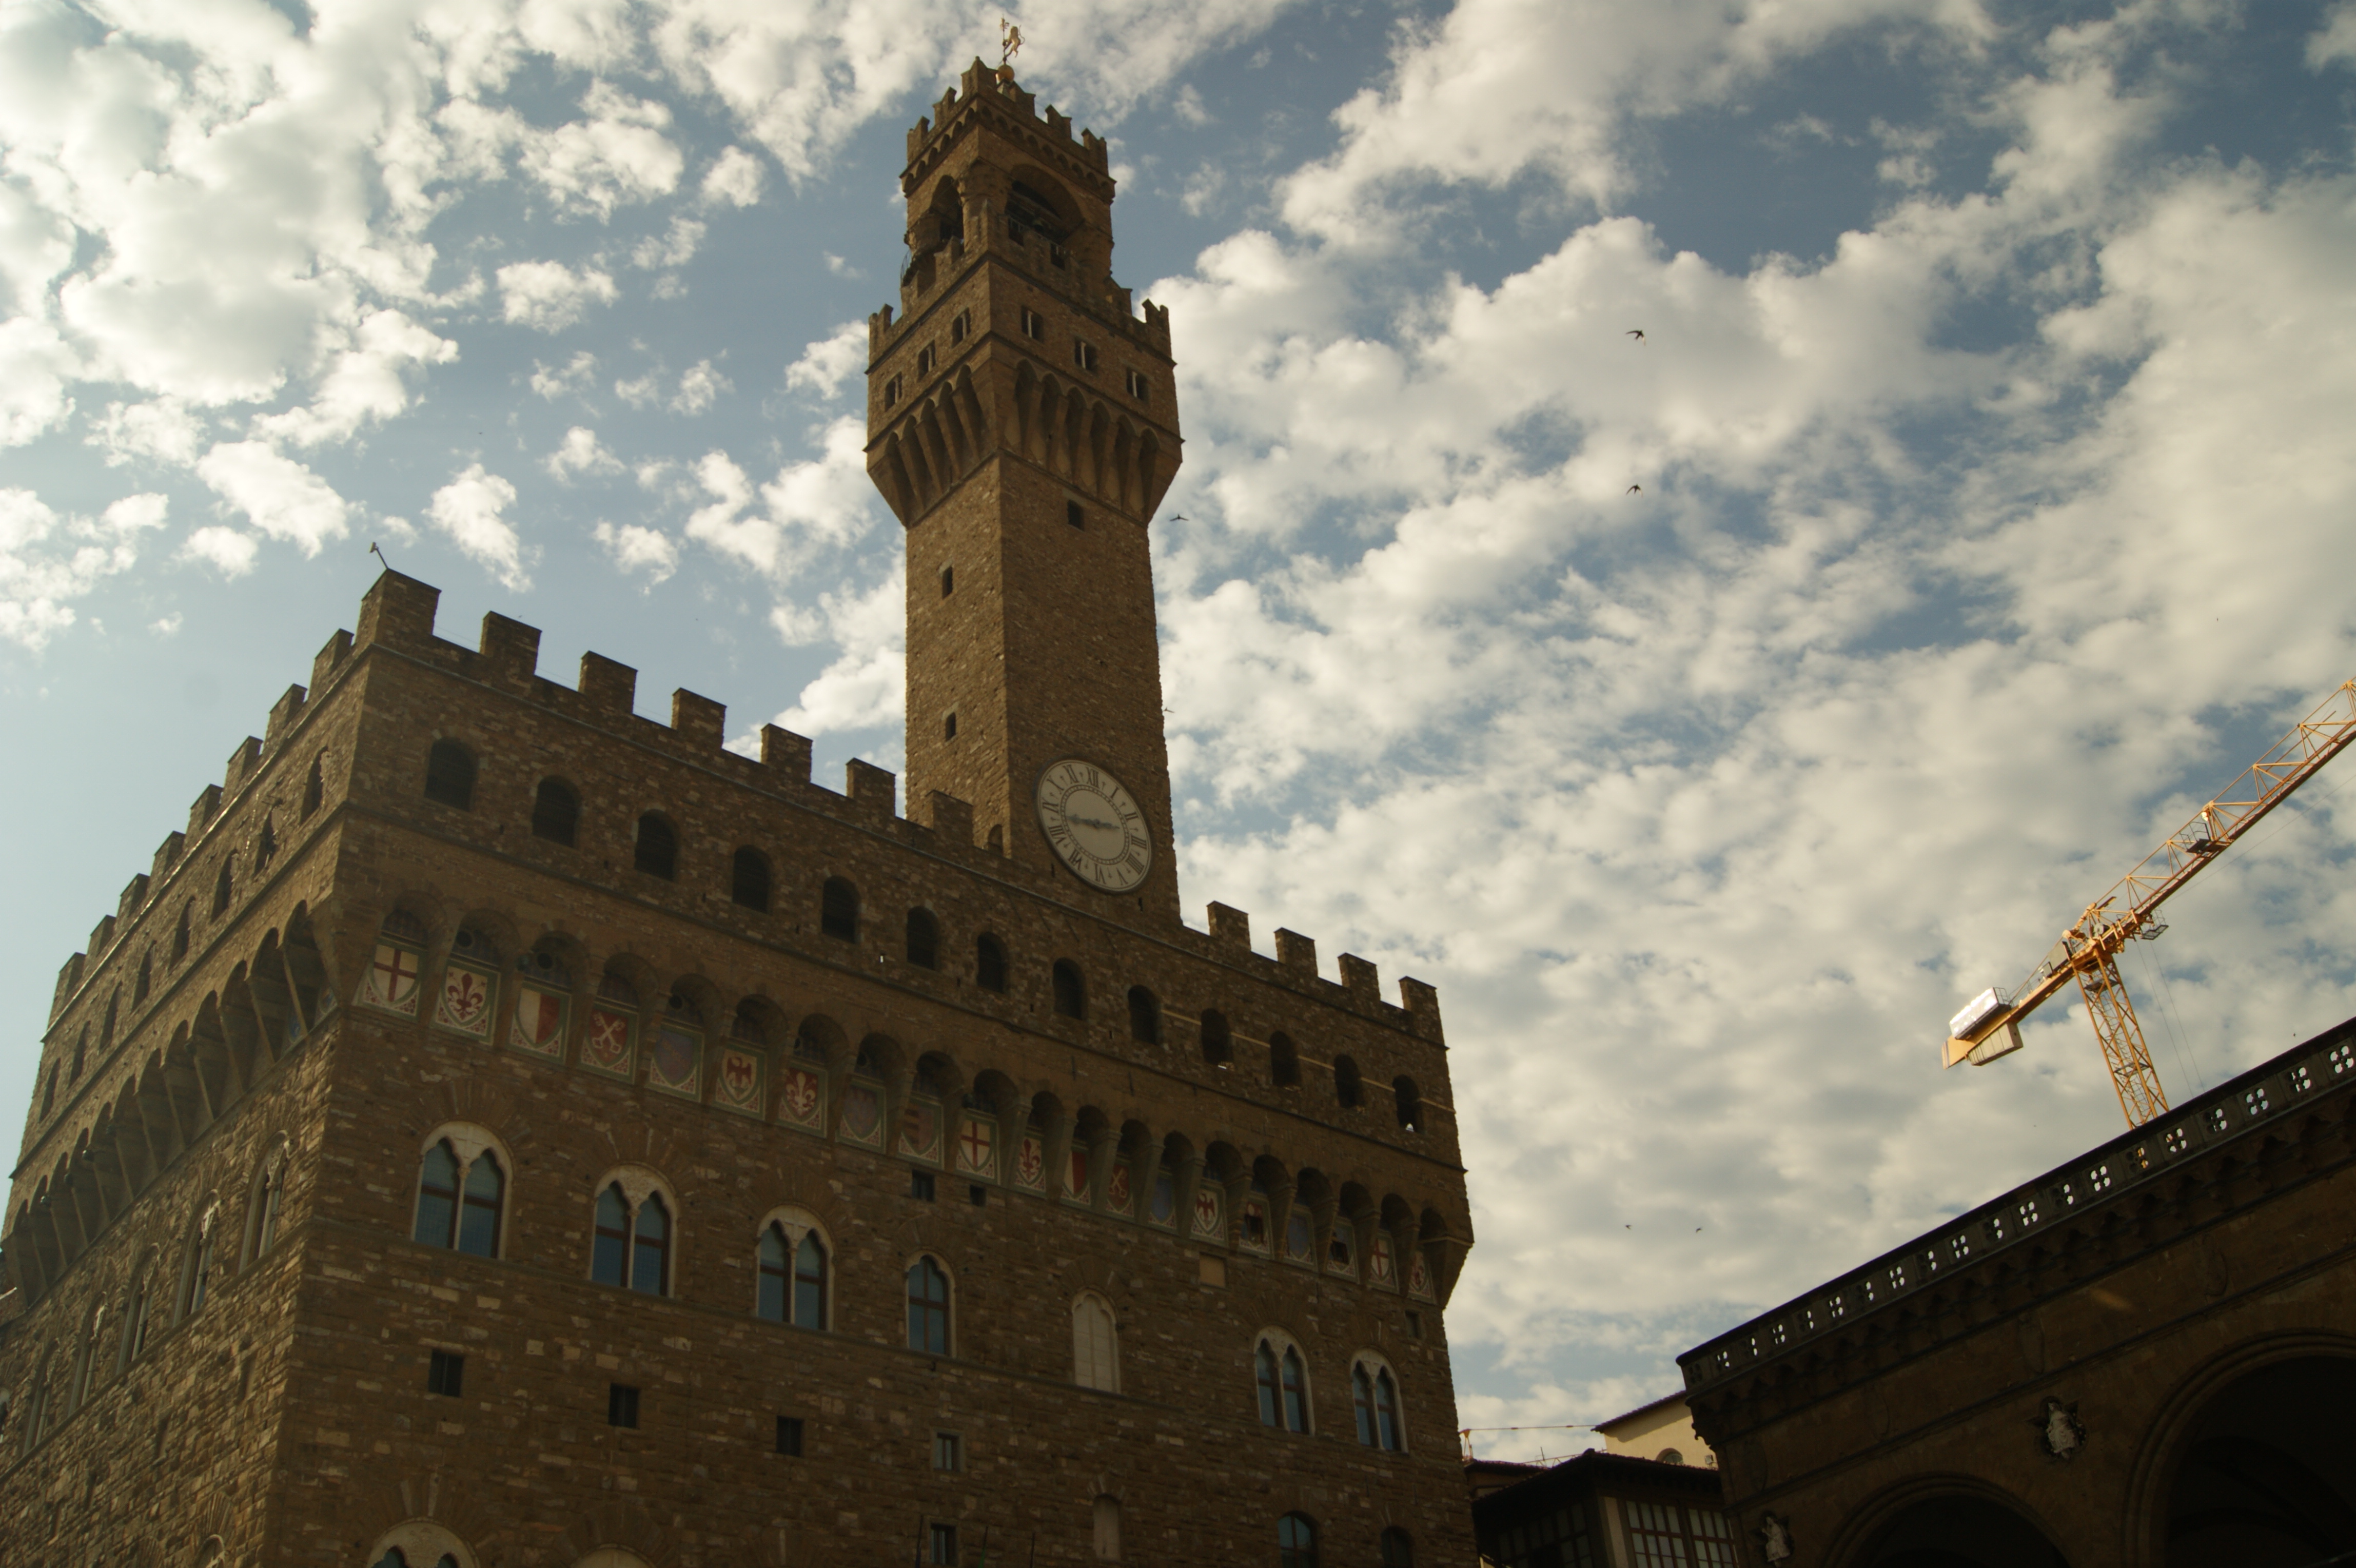 things to do in Florence